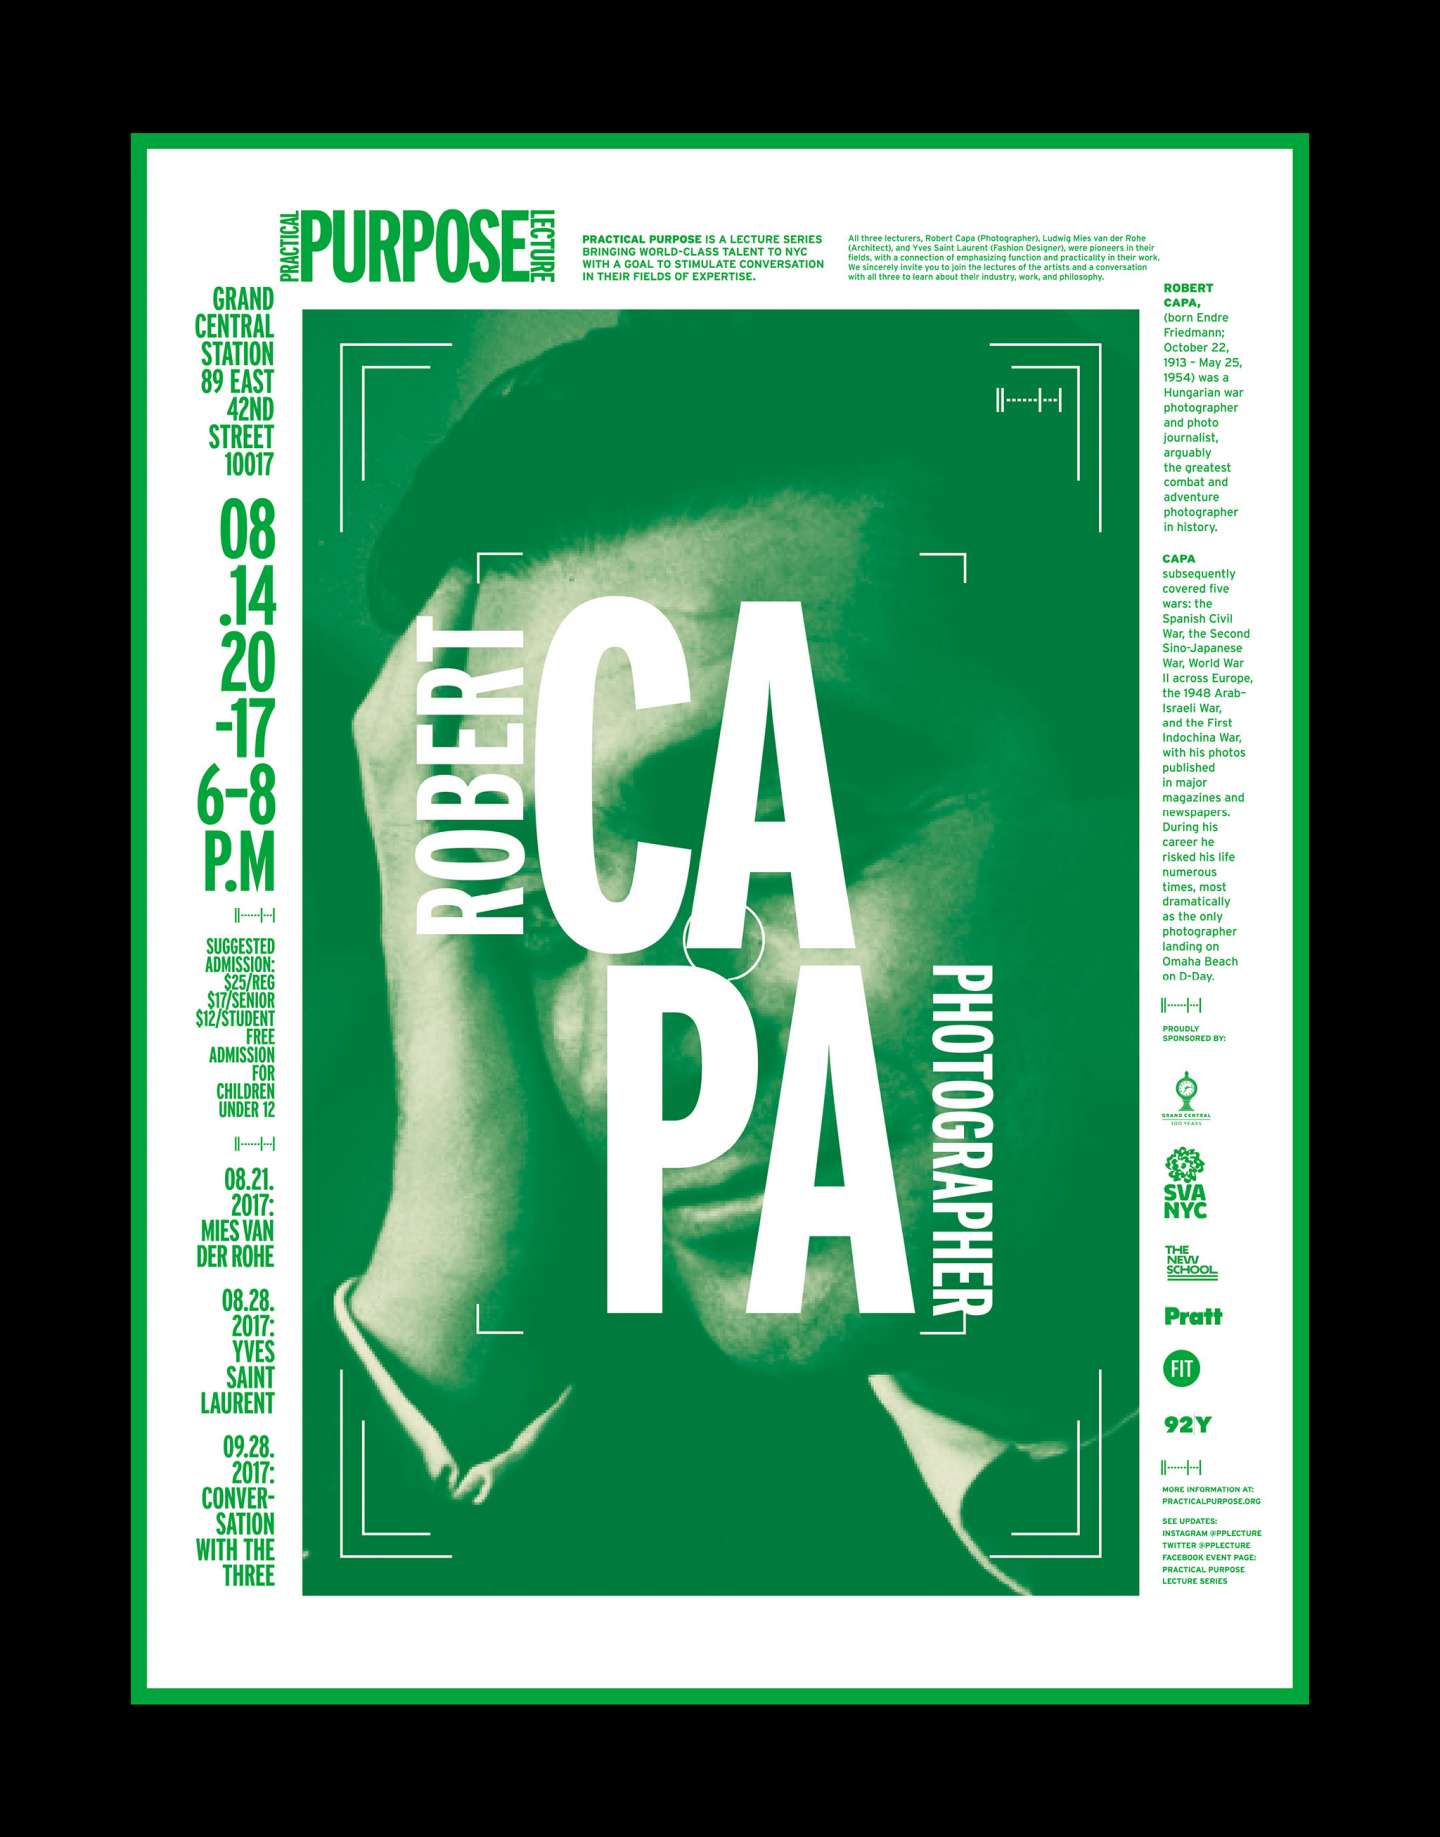 Practical Purpose Lecture Series Poster